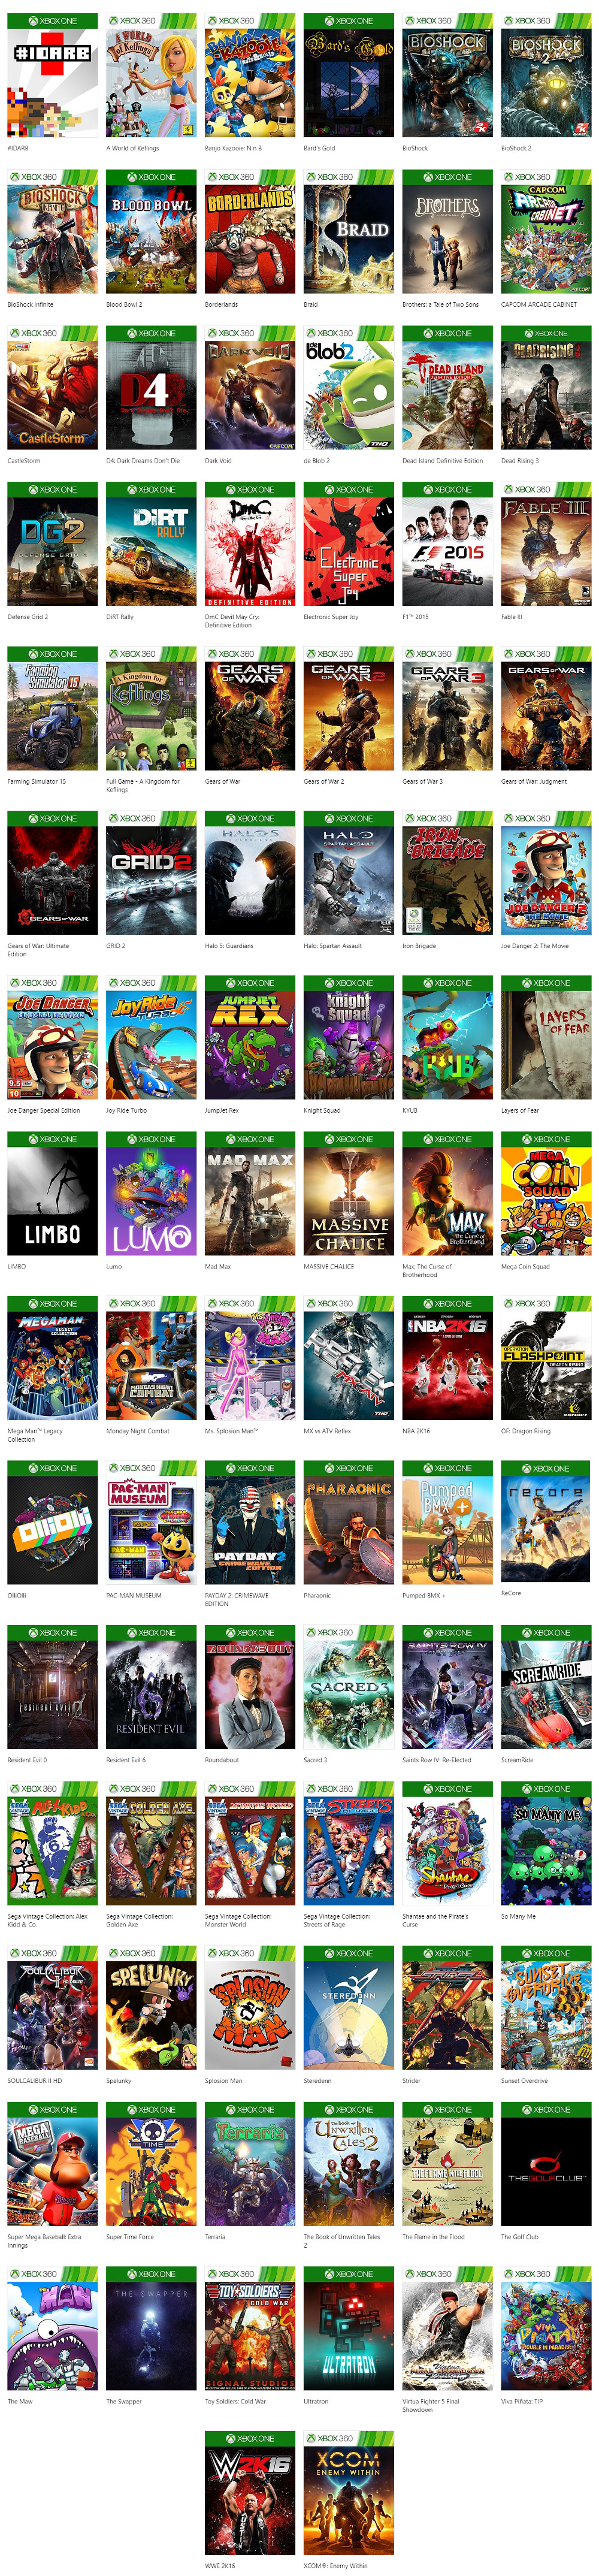 xbox games on game pass